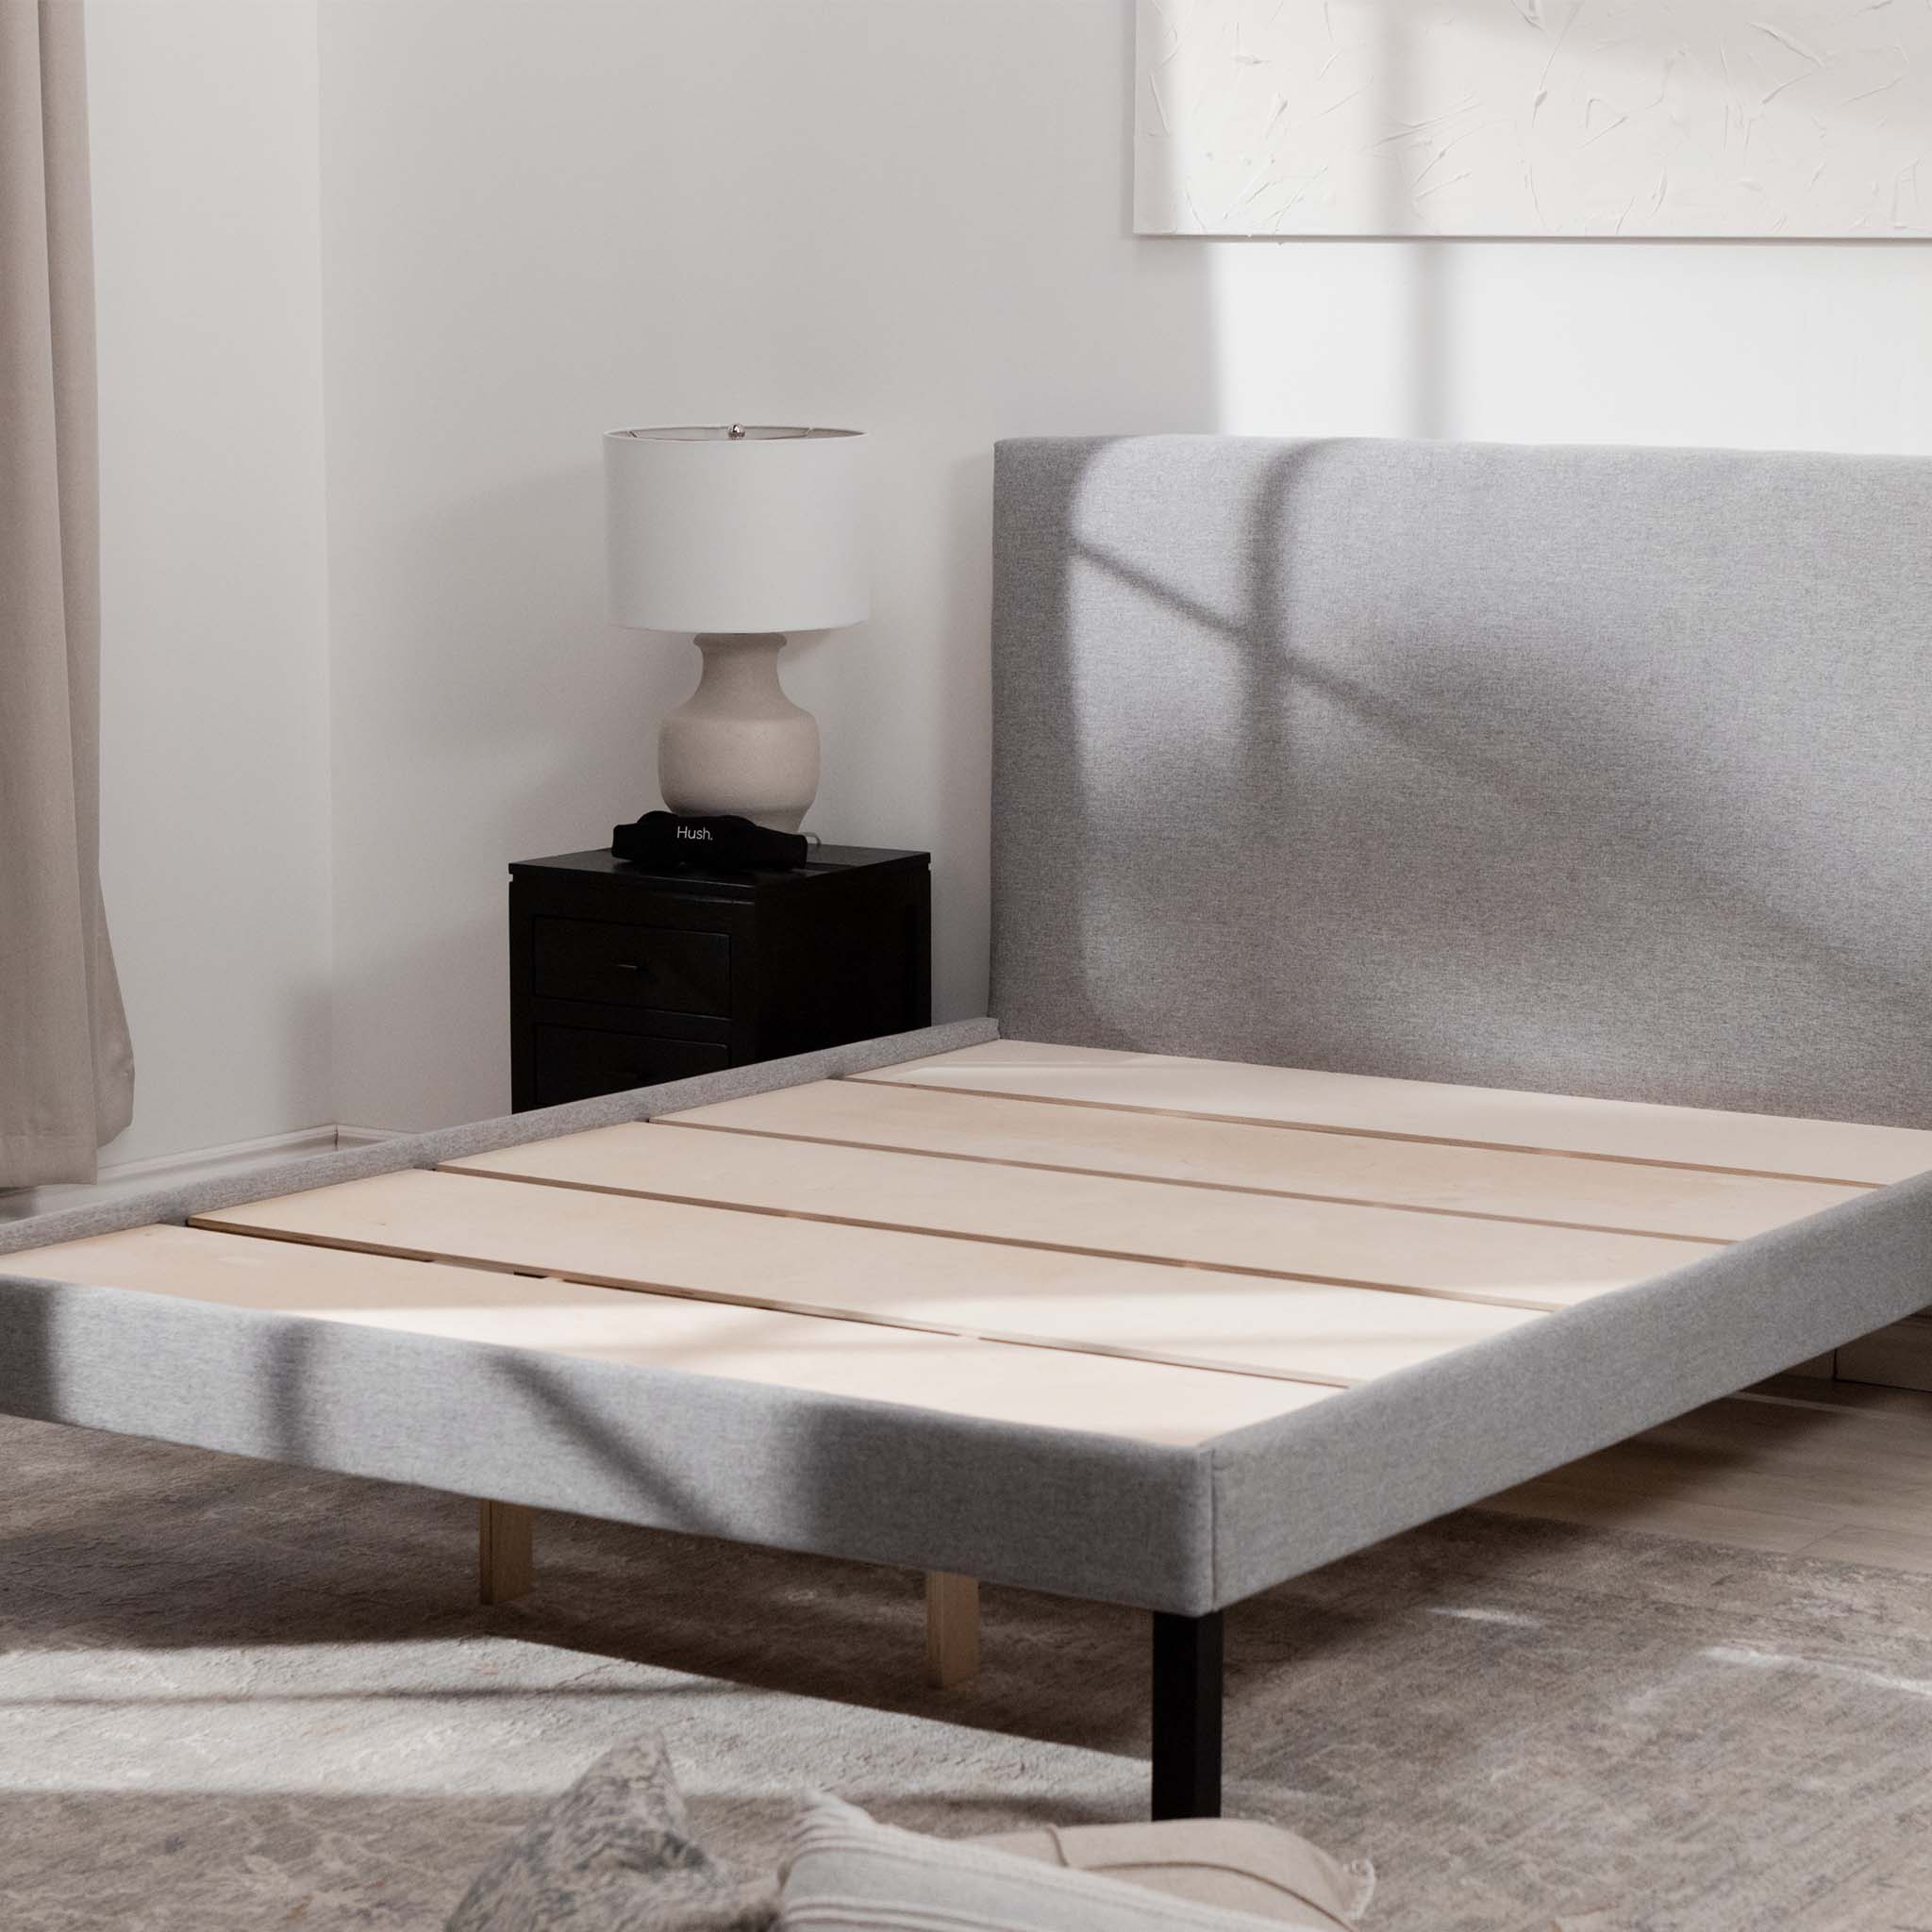 how to attach a headboard to a bed frame